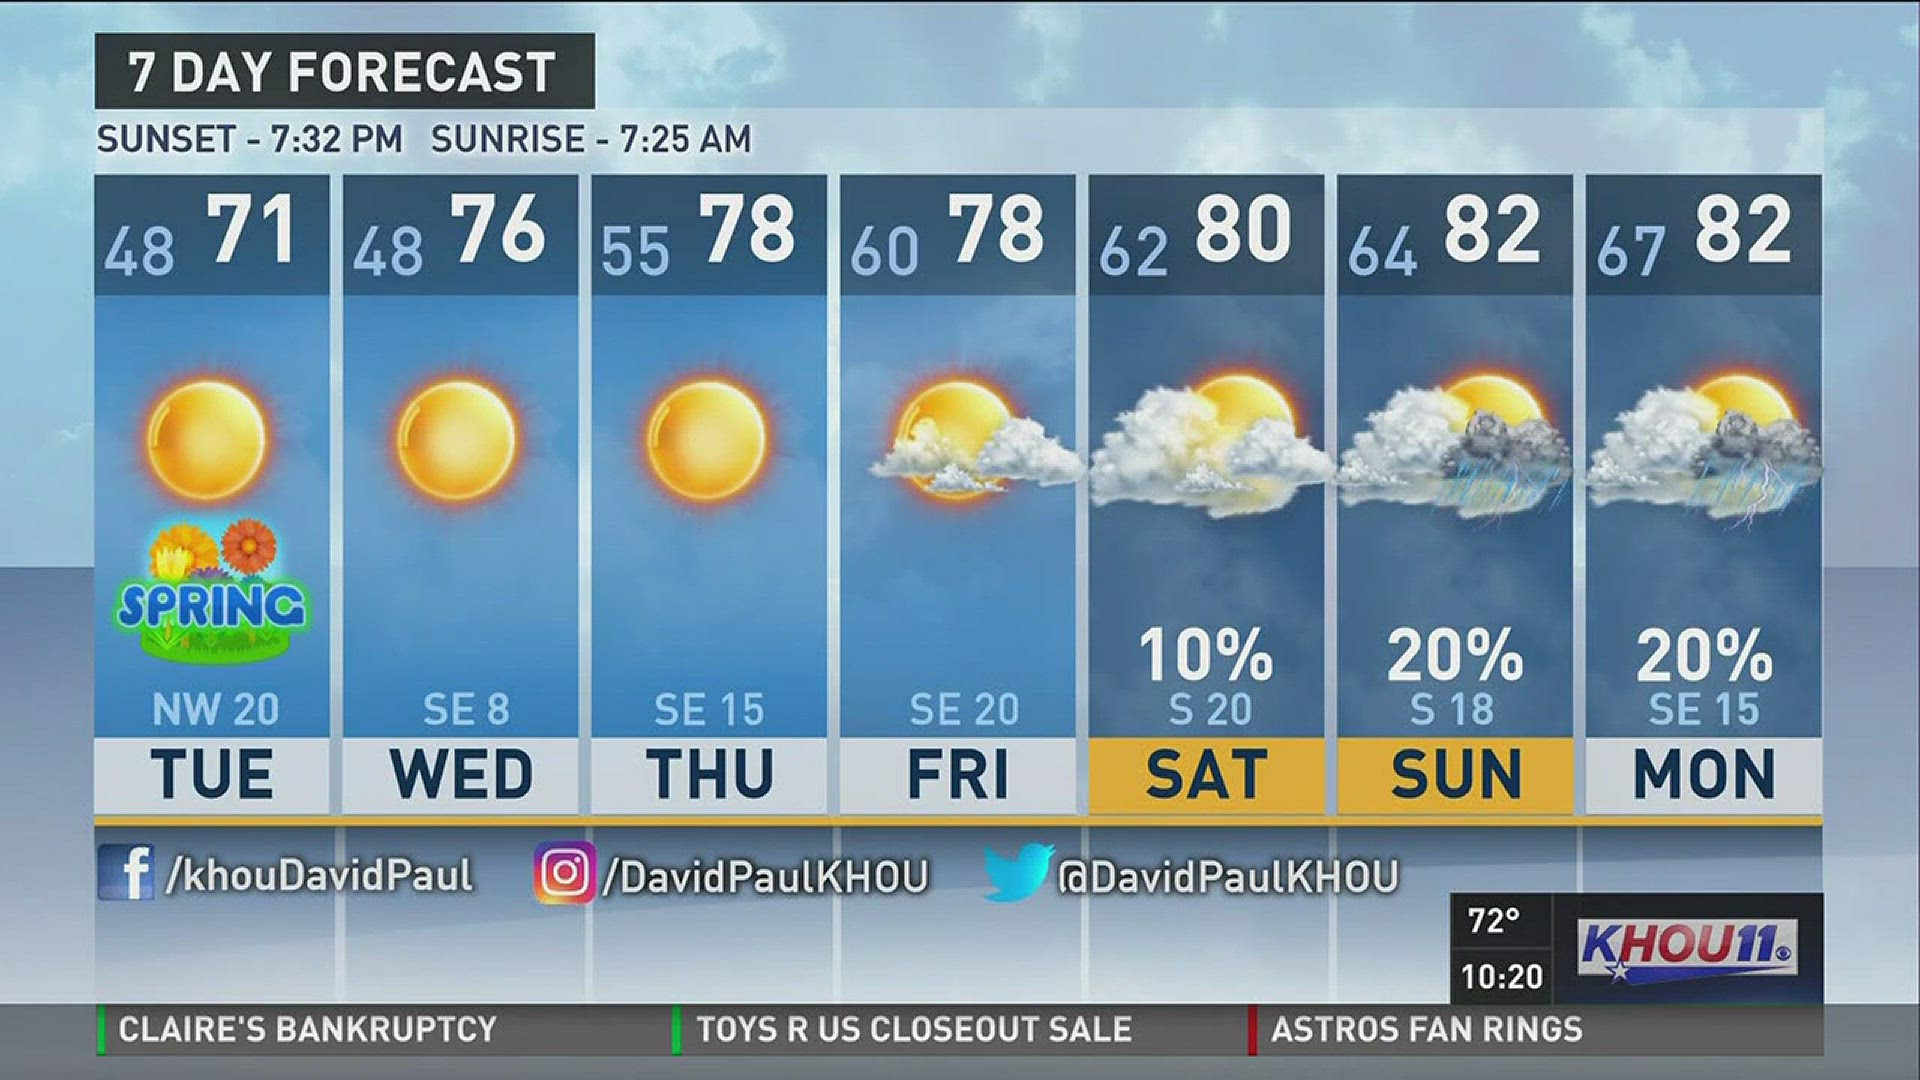 It will be a chilly start to the first official day of spring, according to KHOU 11 Chief Meteorologist David Paul.